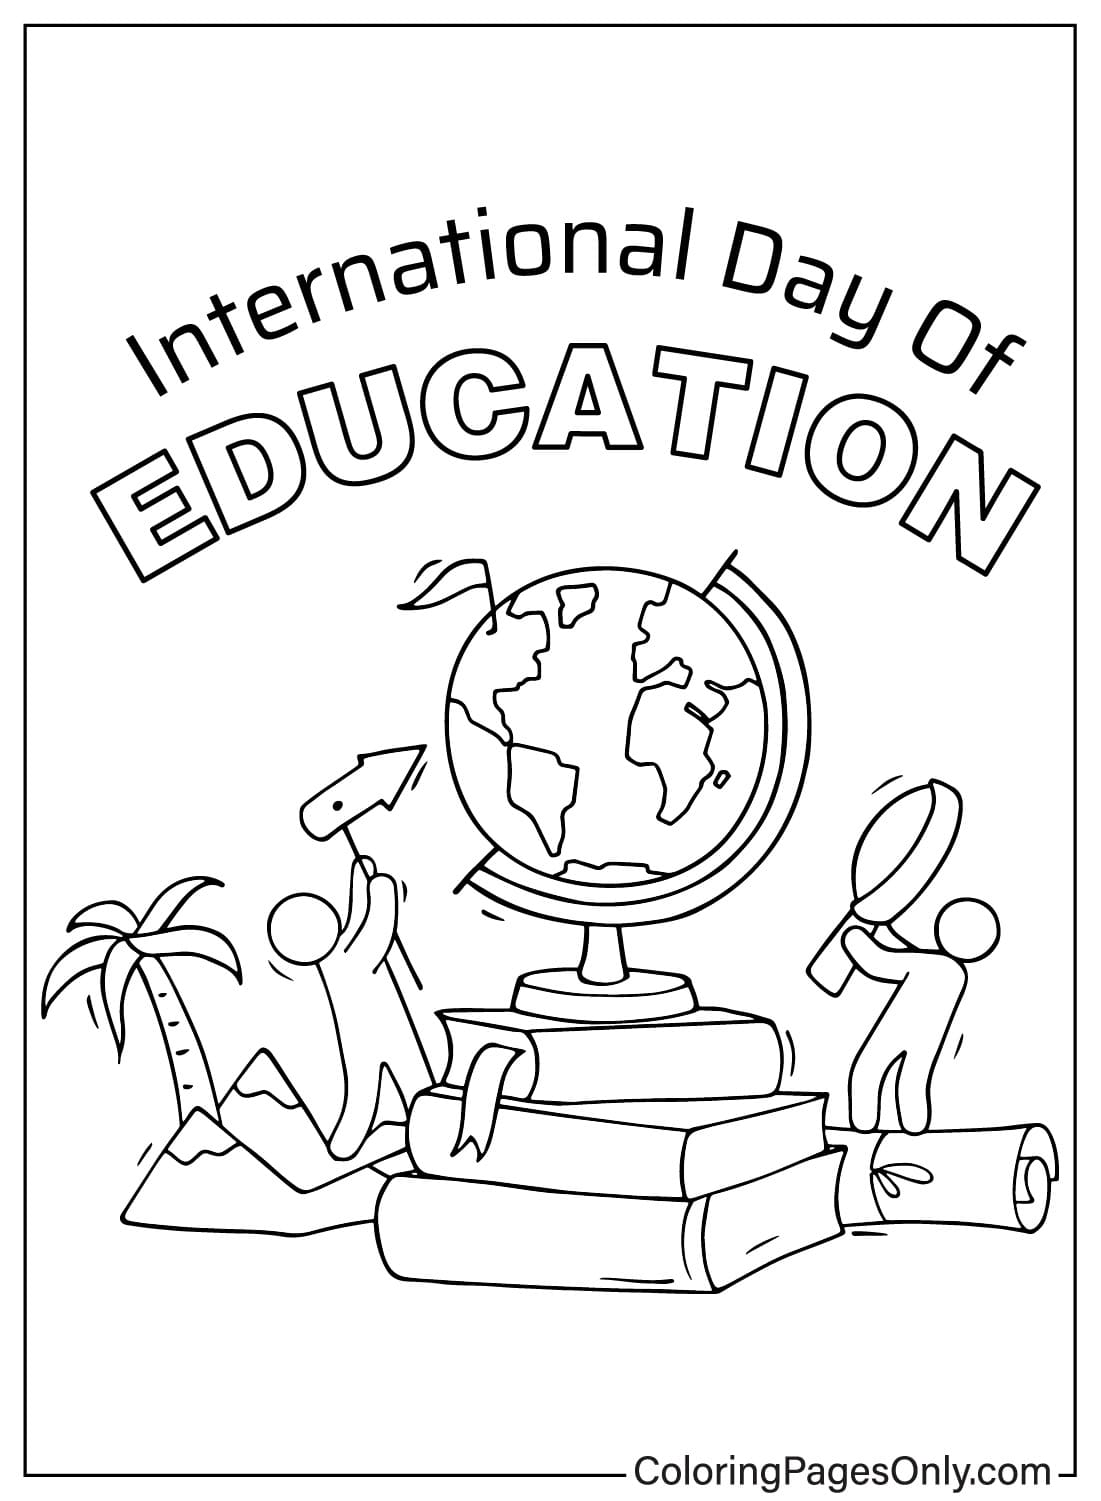 International Day of Education Coloring Page Free Printable from International Day of Education